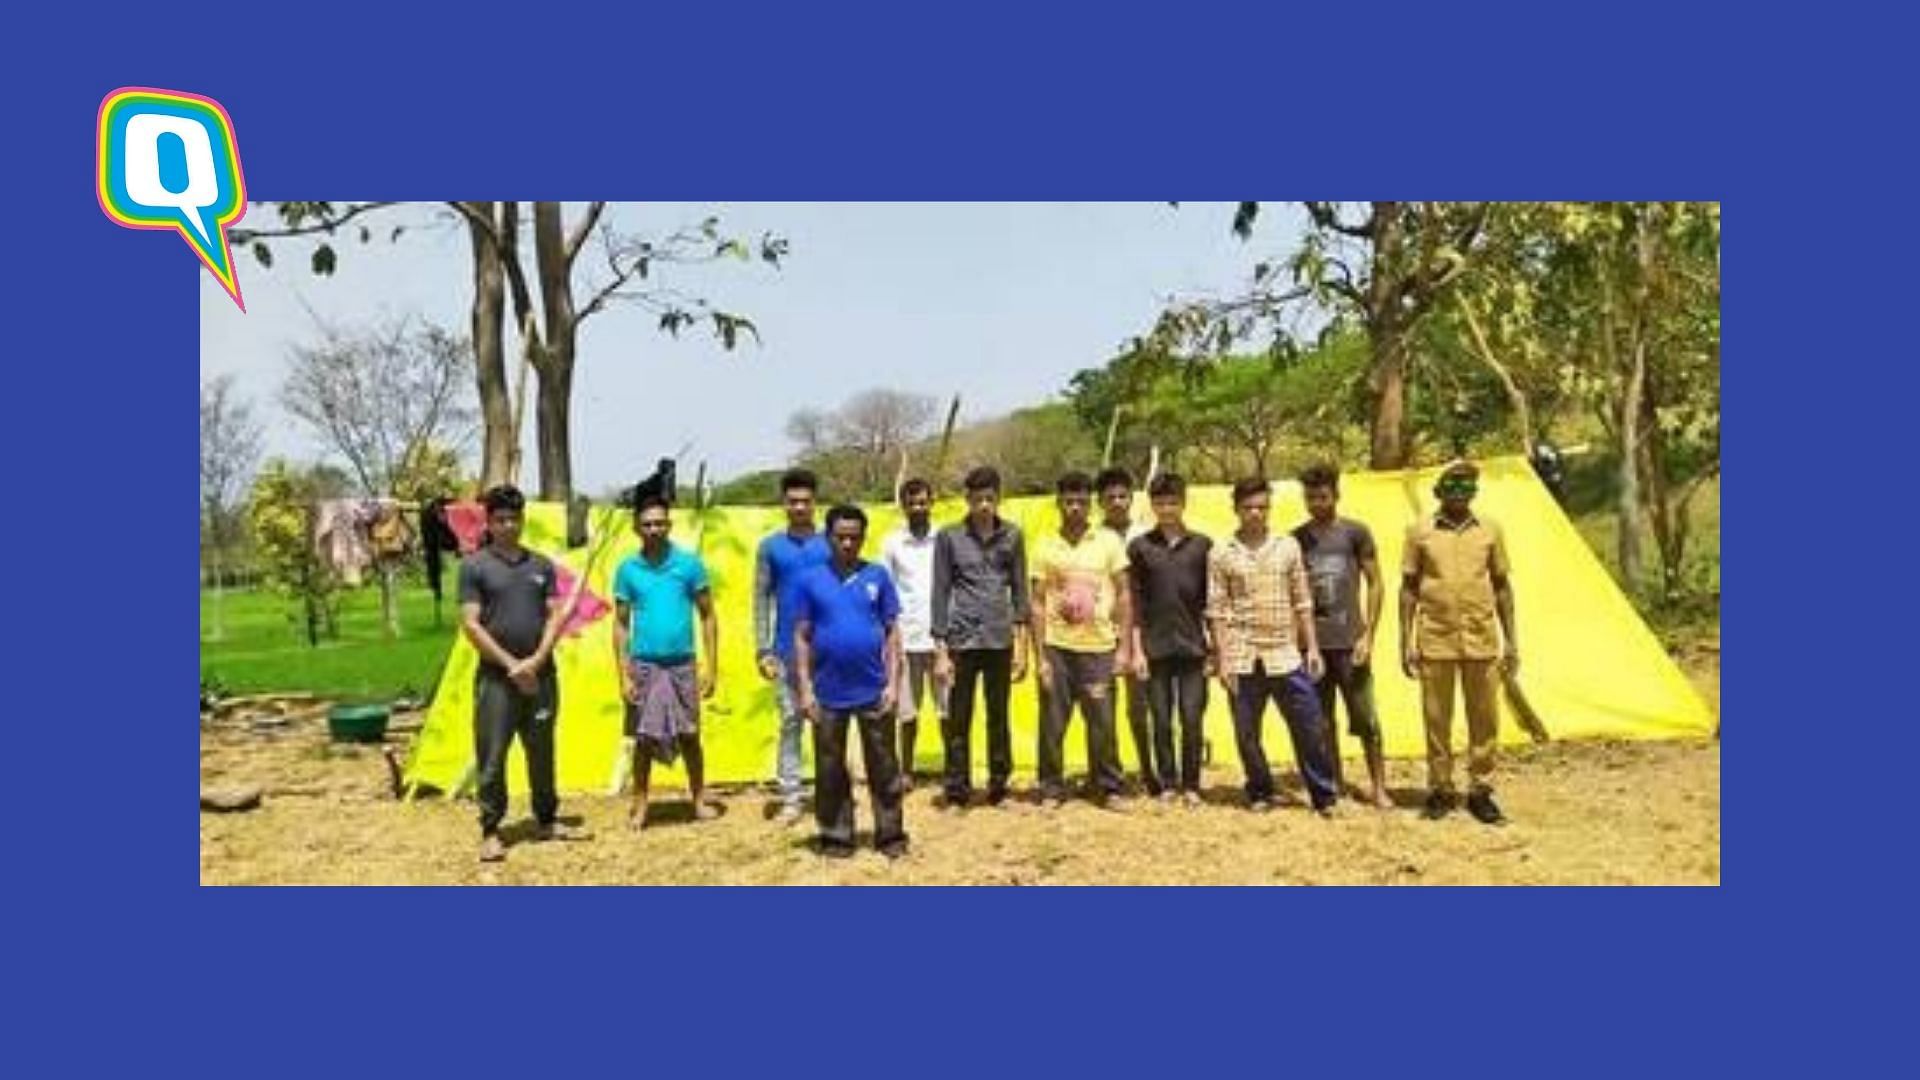 12 daily wage earners who reached their village and got themselves tested immediately.